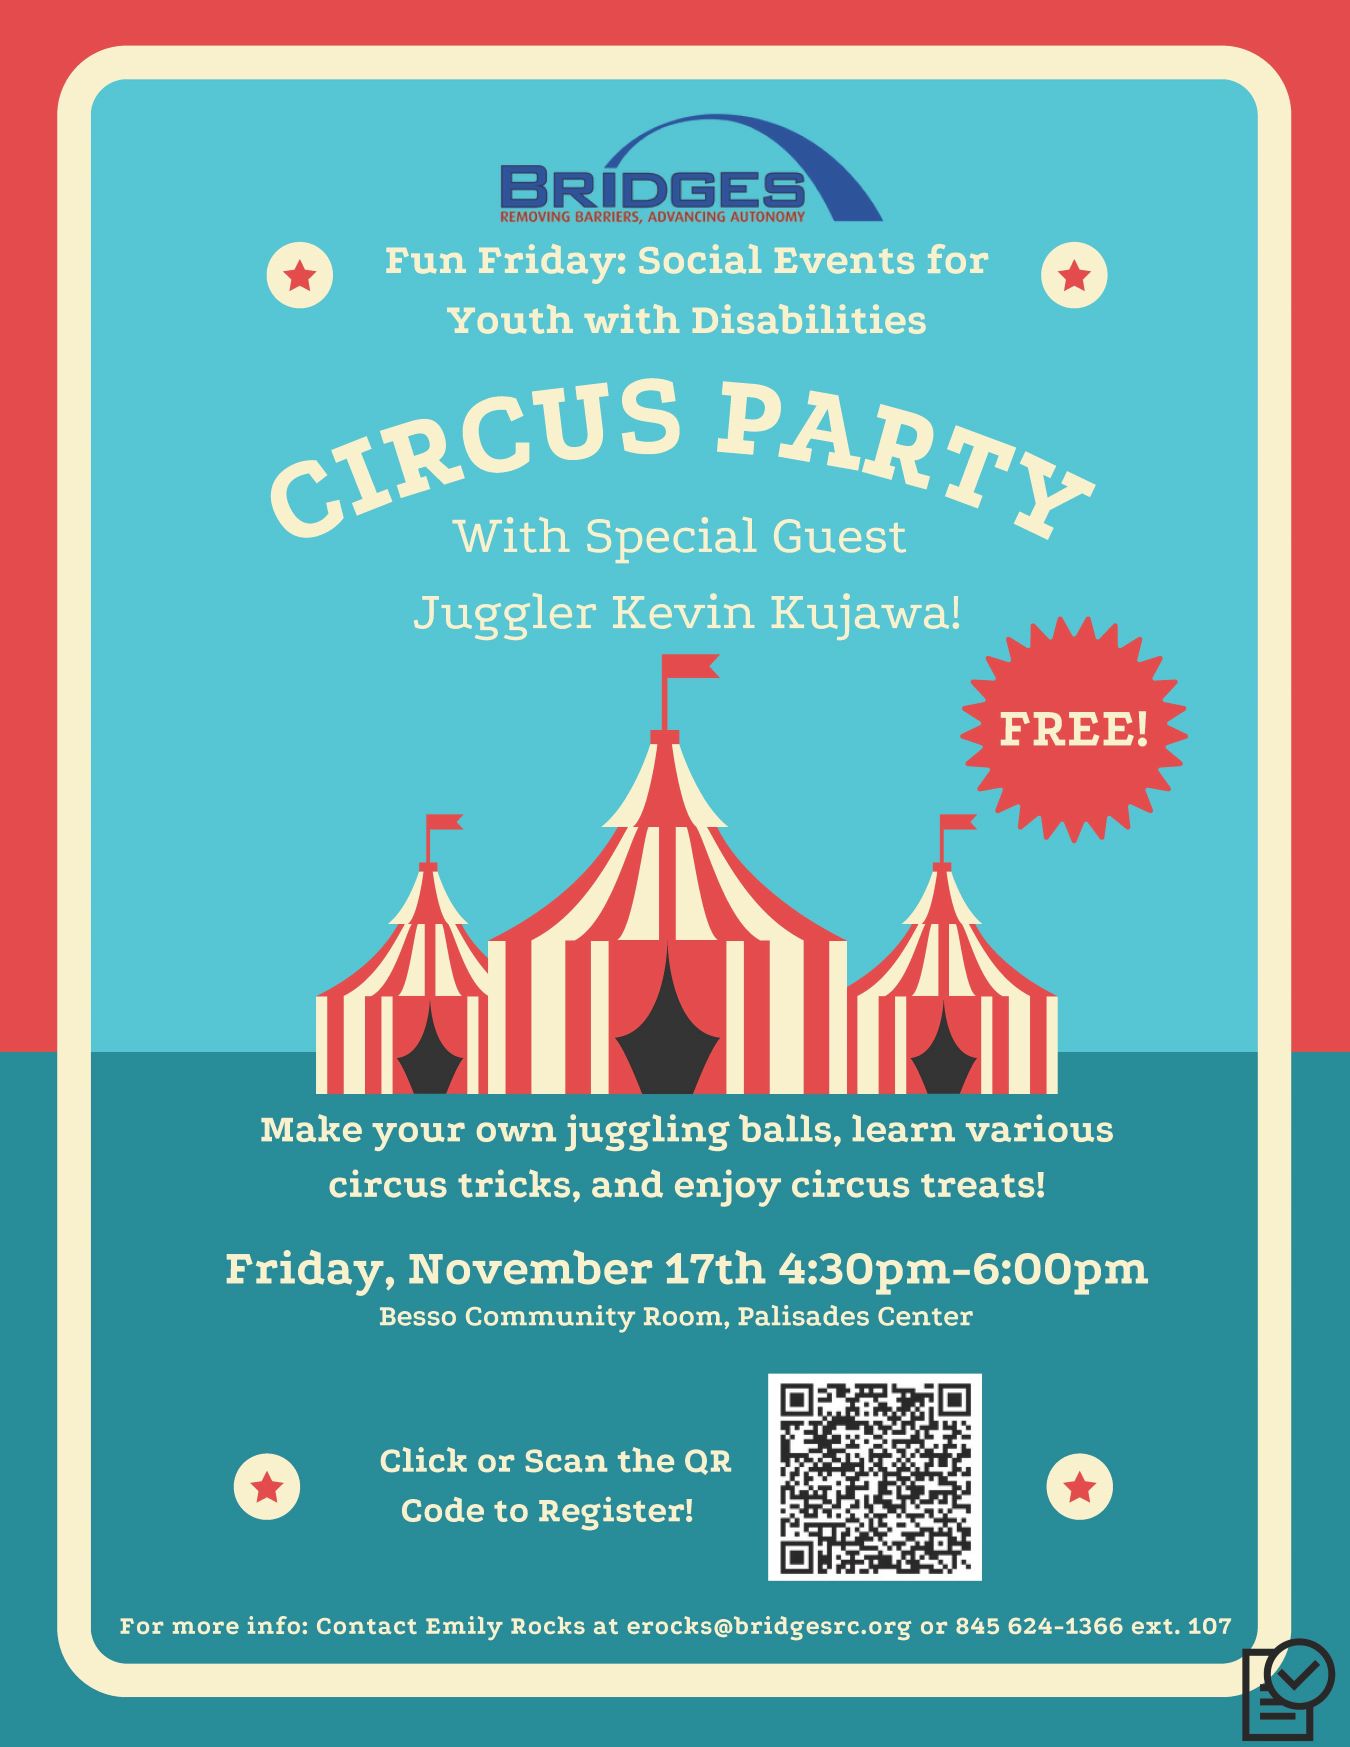 Circus Party approved